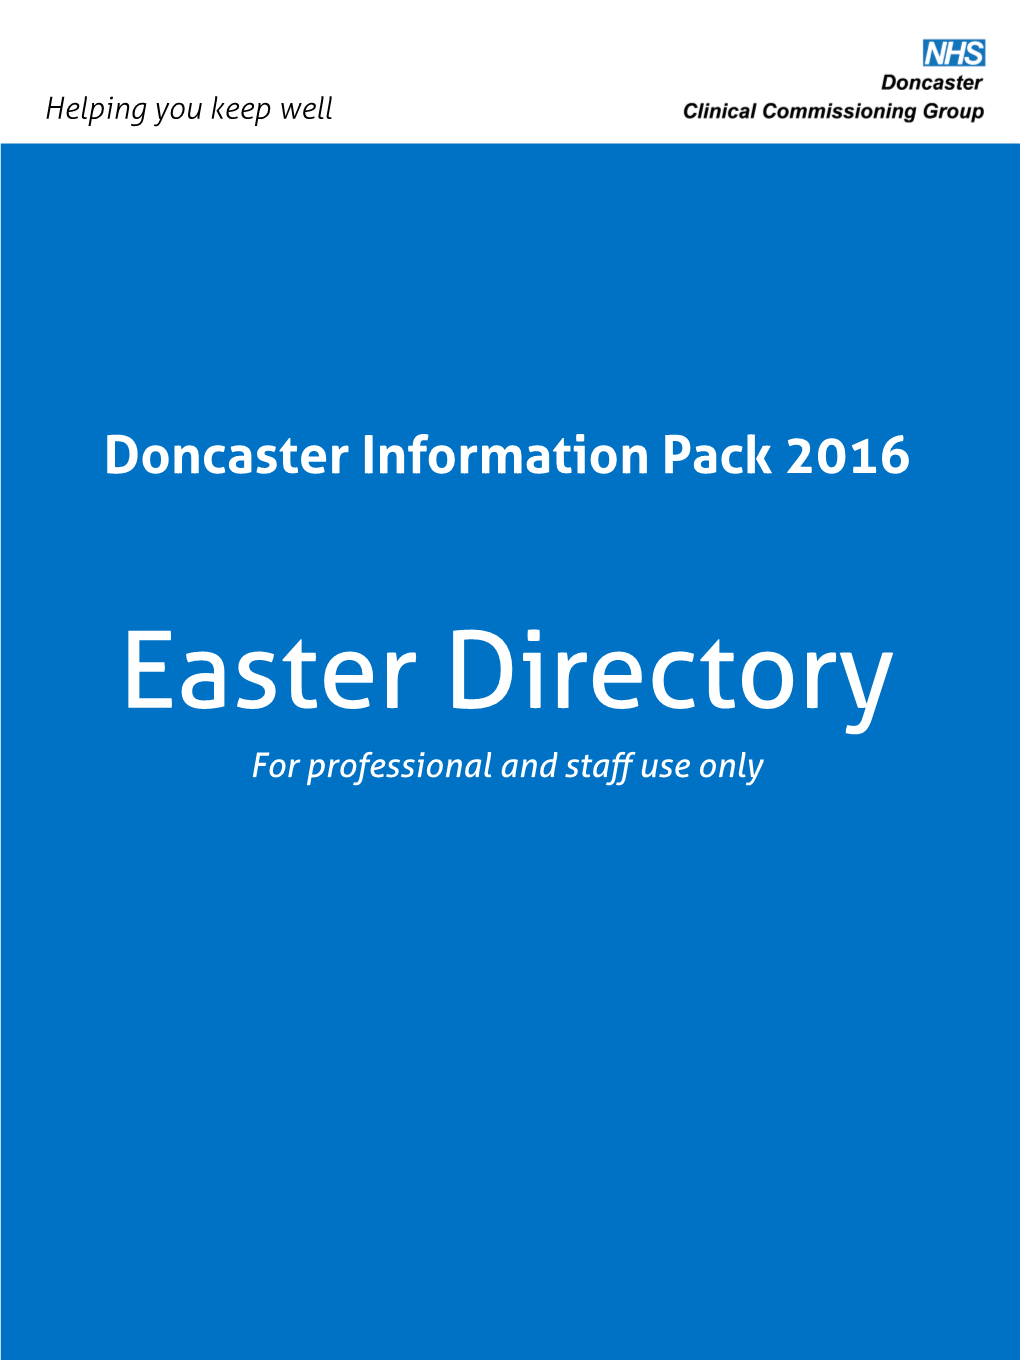 Easter Directory for Professional and Staff Use Only Contents